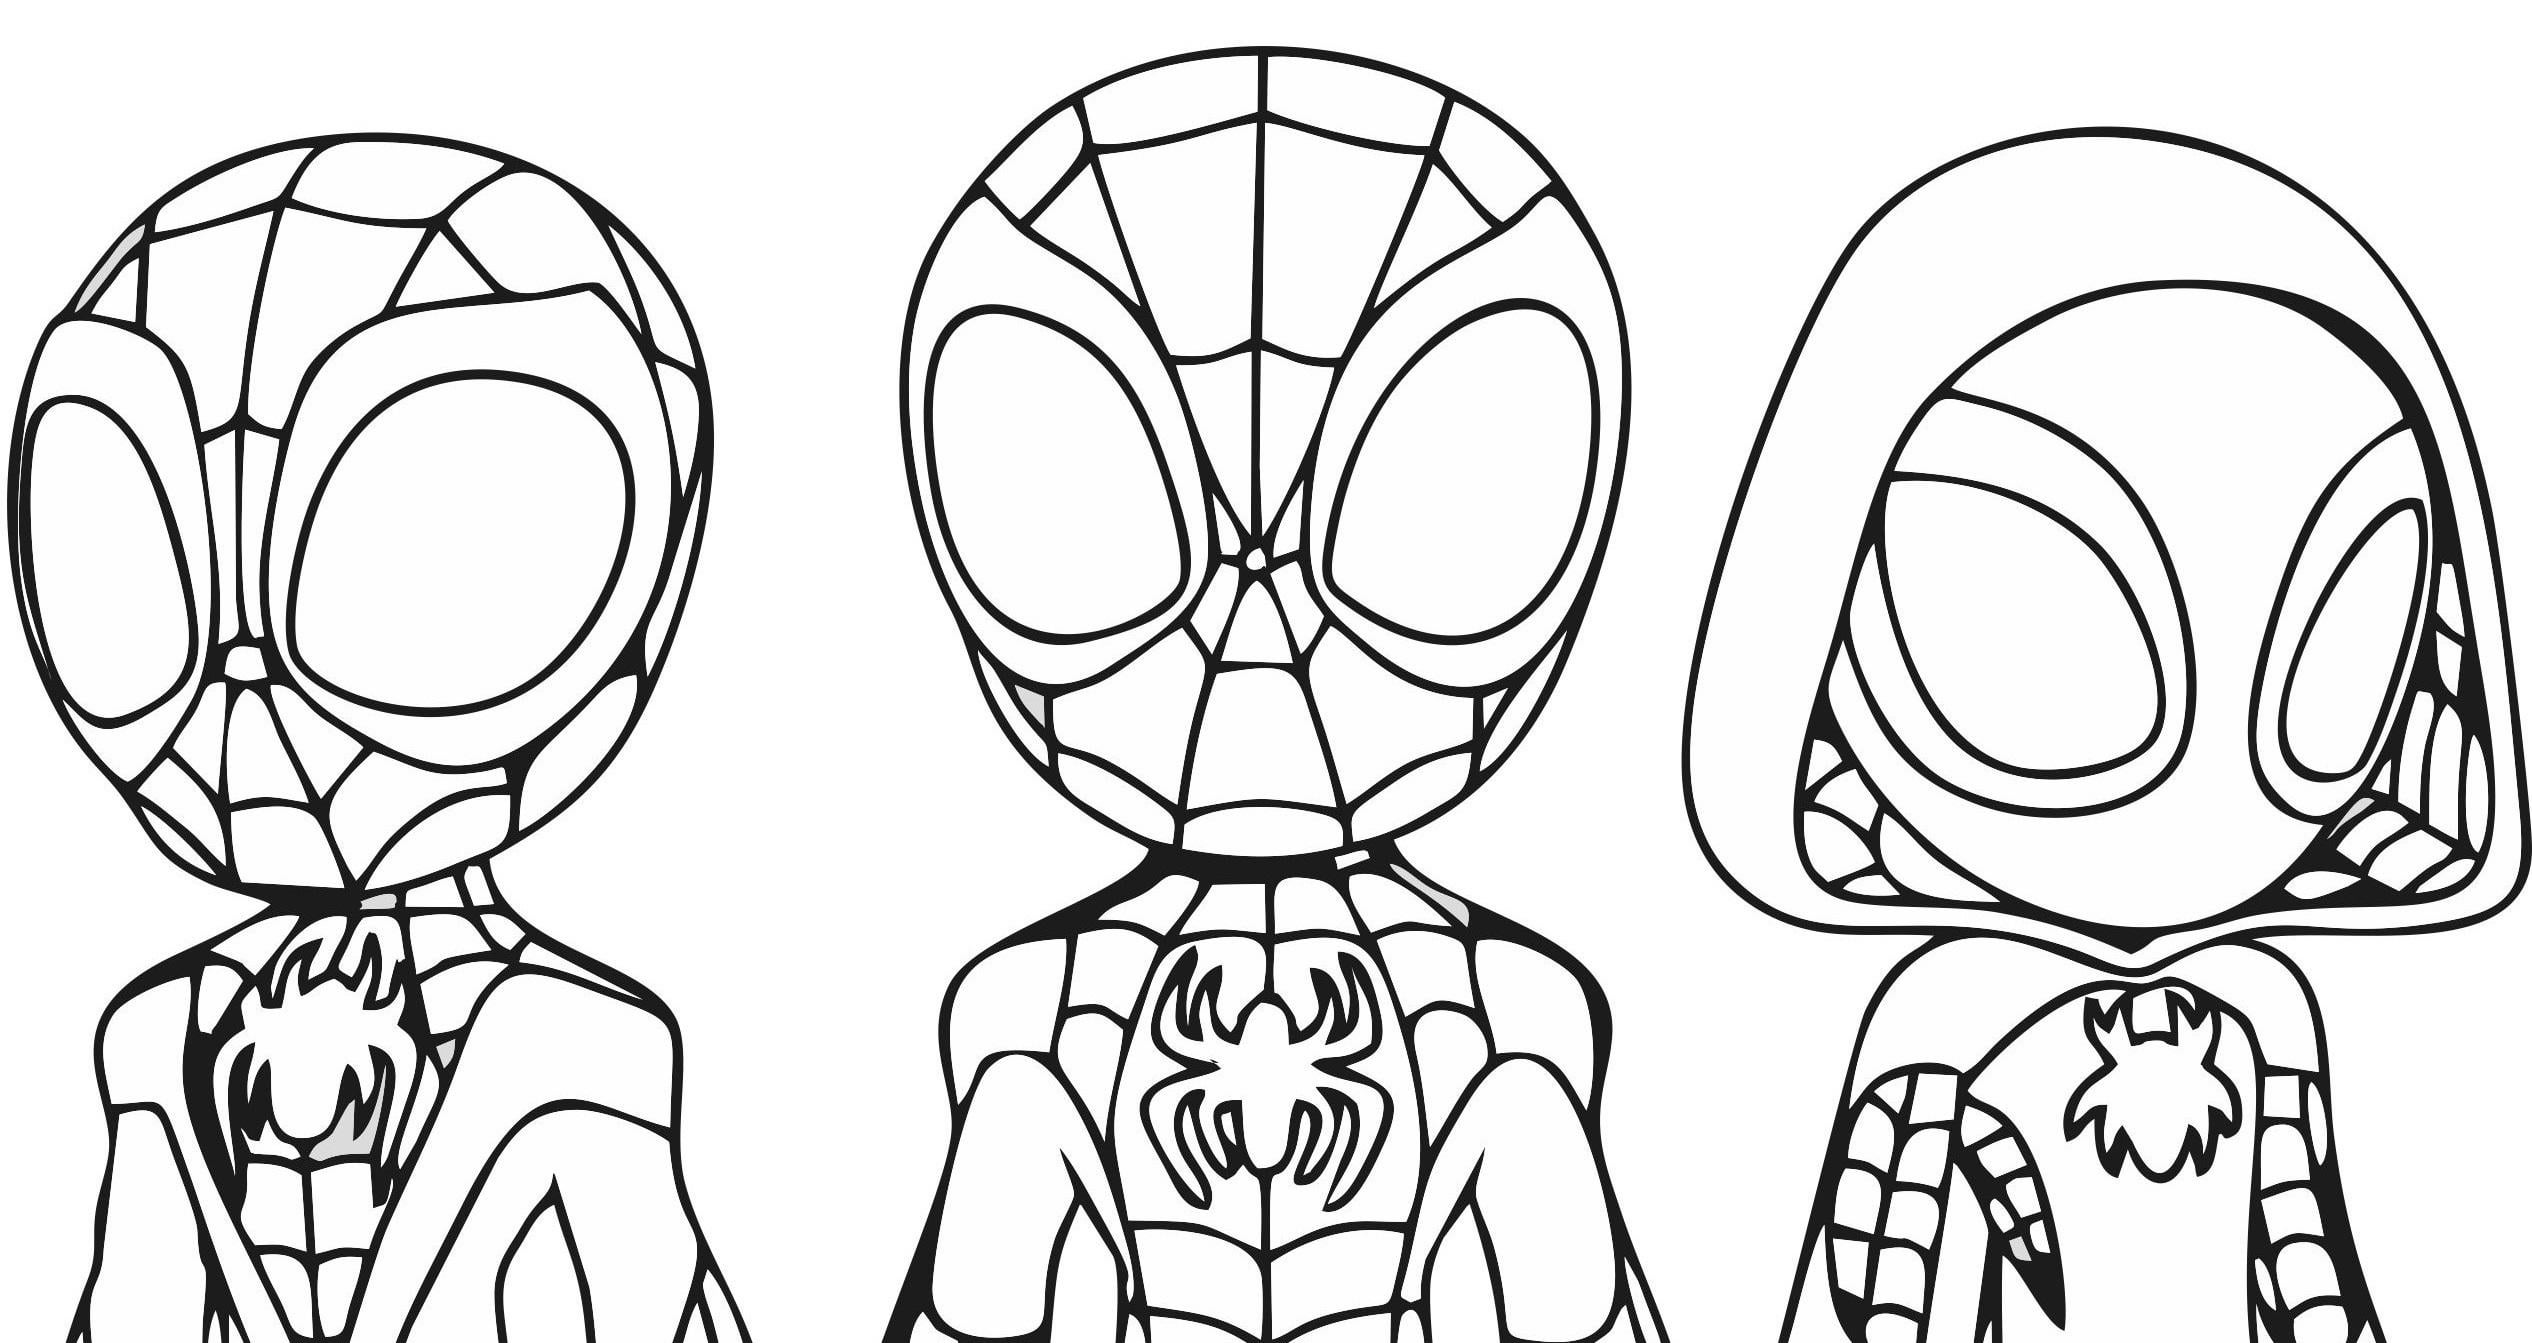 Unlock creativity with free printable spidey and his amazing friends coloring pages uowlcolor